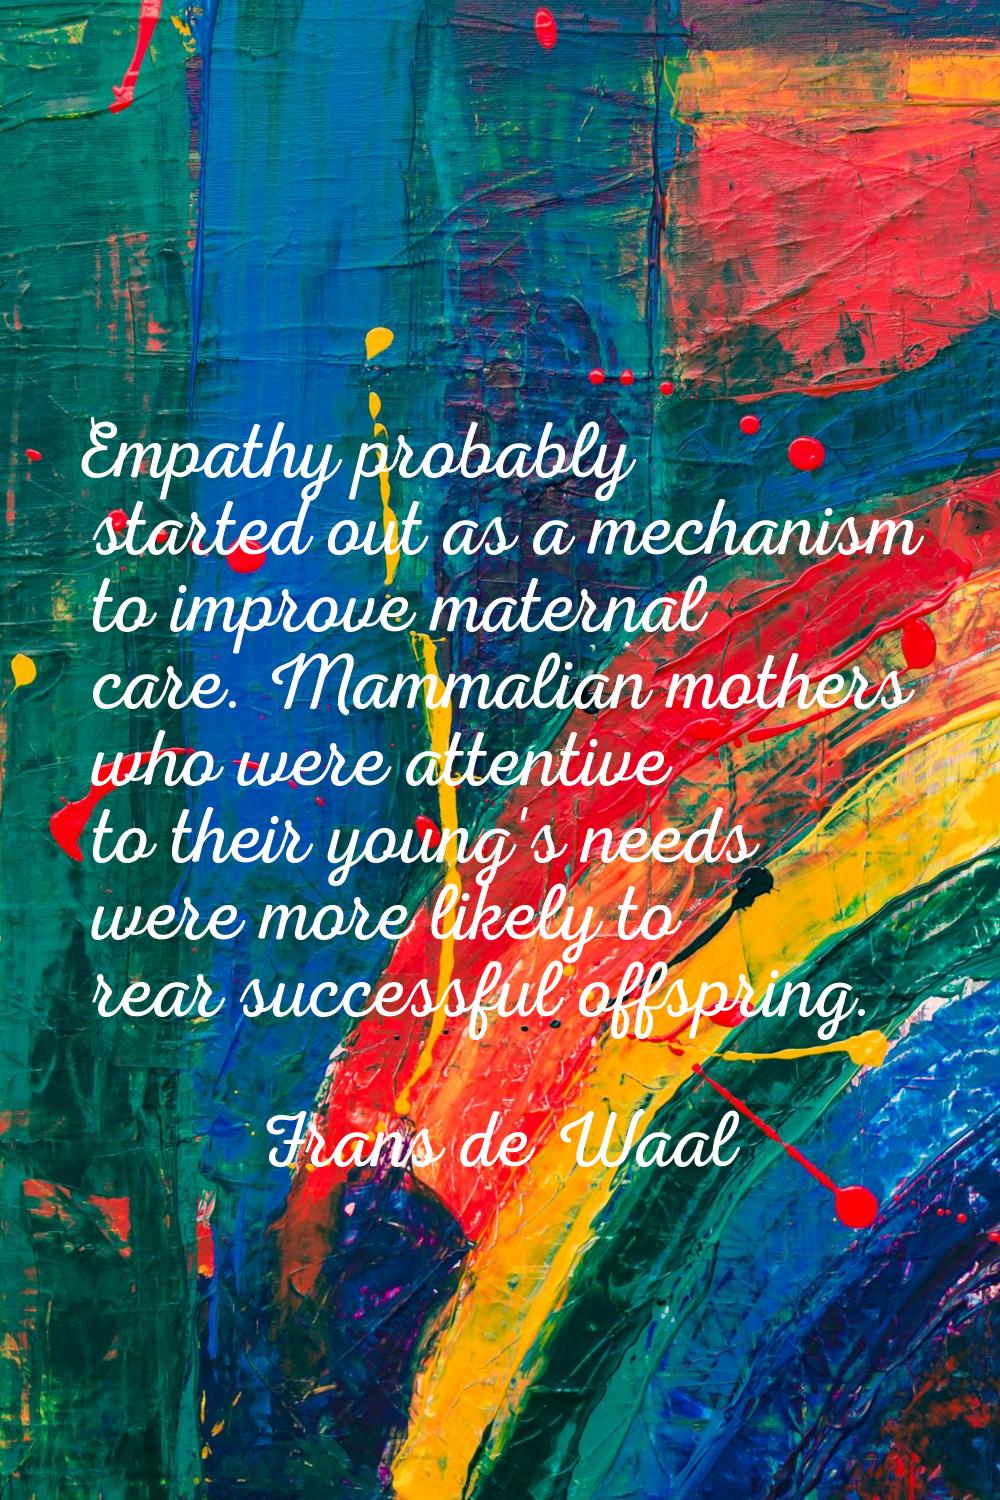 Empathy probably started out as a mechanism to improve maternal care. Mammalian mothers who were at